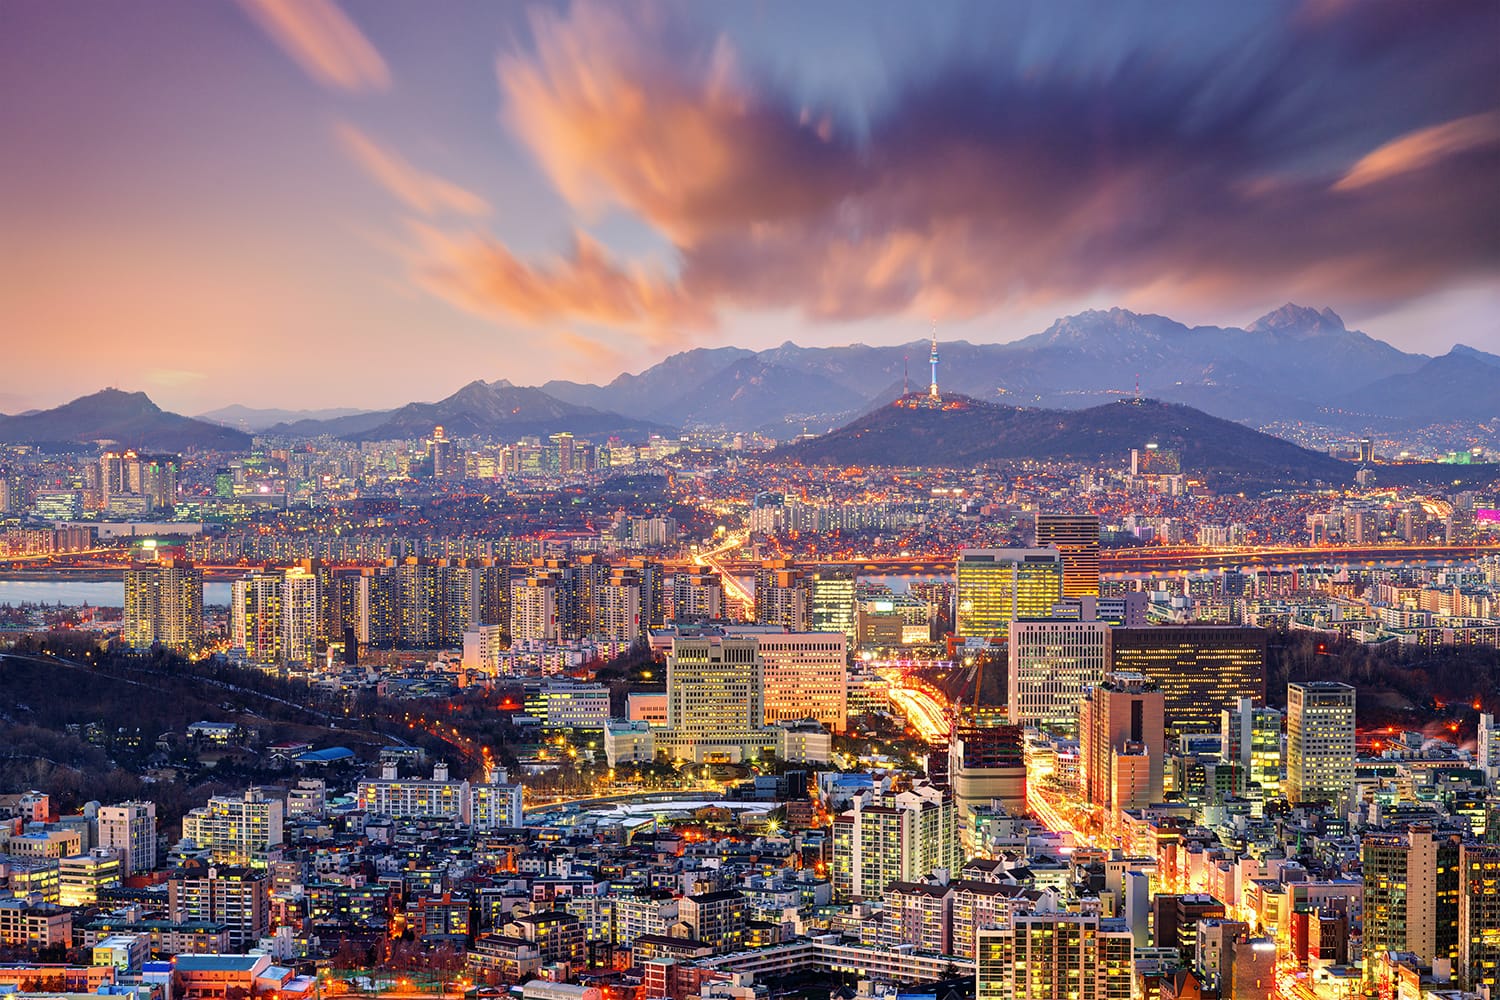 Sunset view of Seoul in South Korea